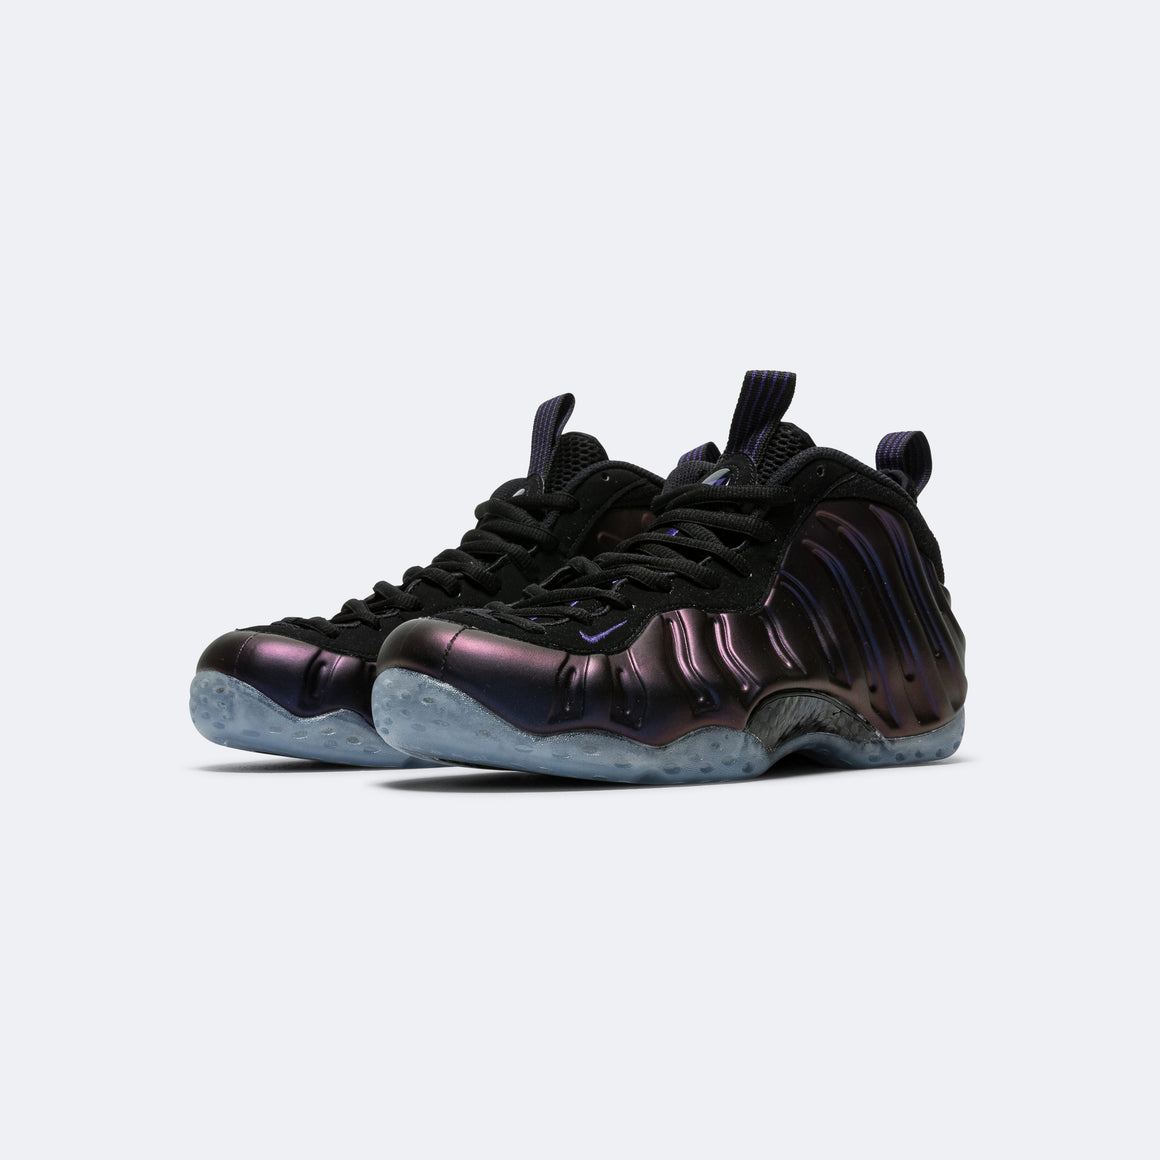 Nike - Air Foamposite One - Black/Varsity Purple - UP THERE